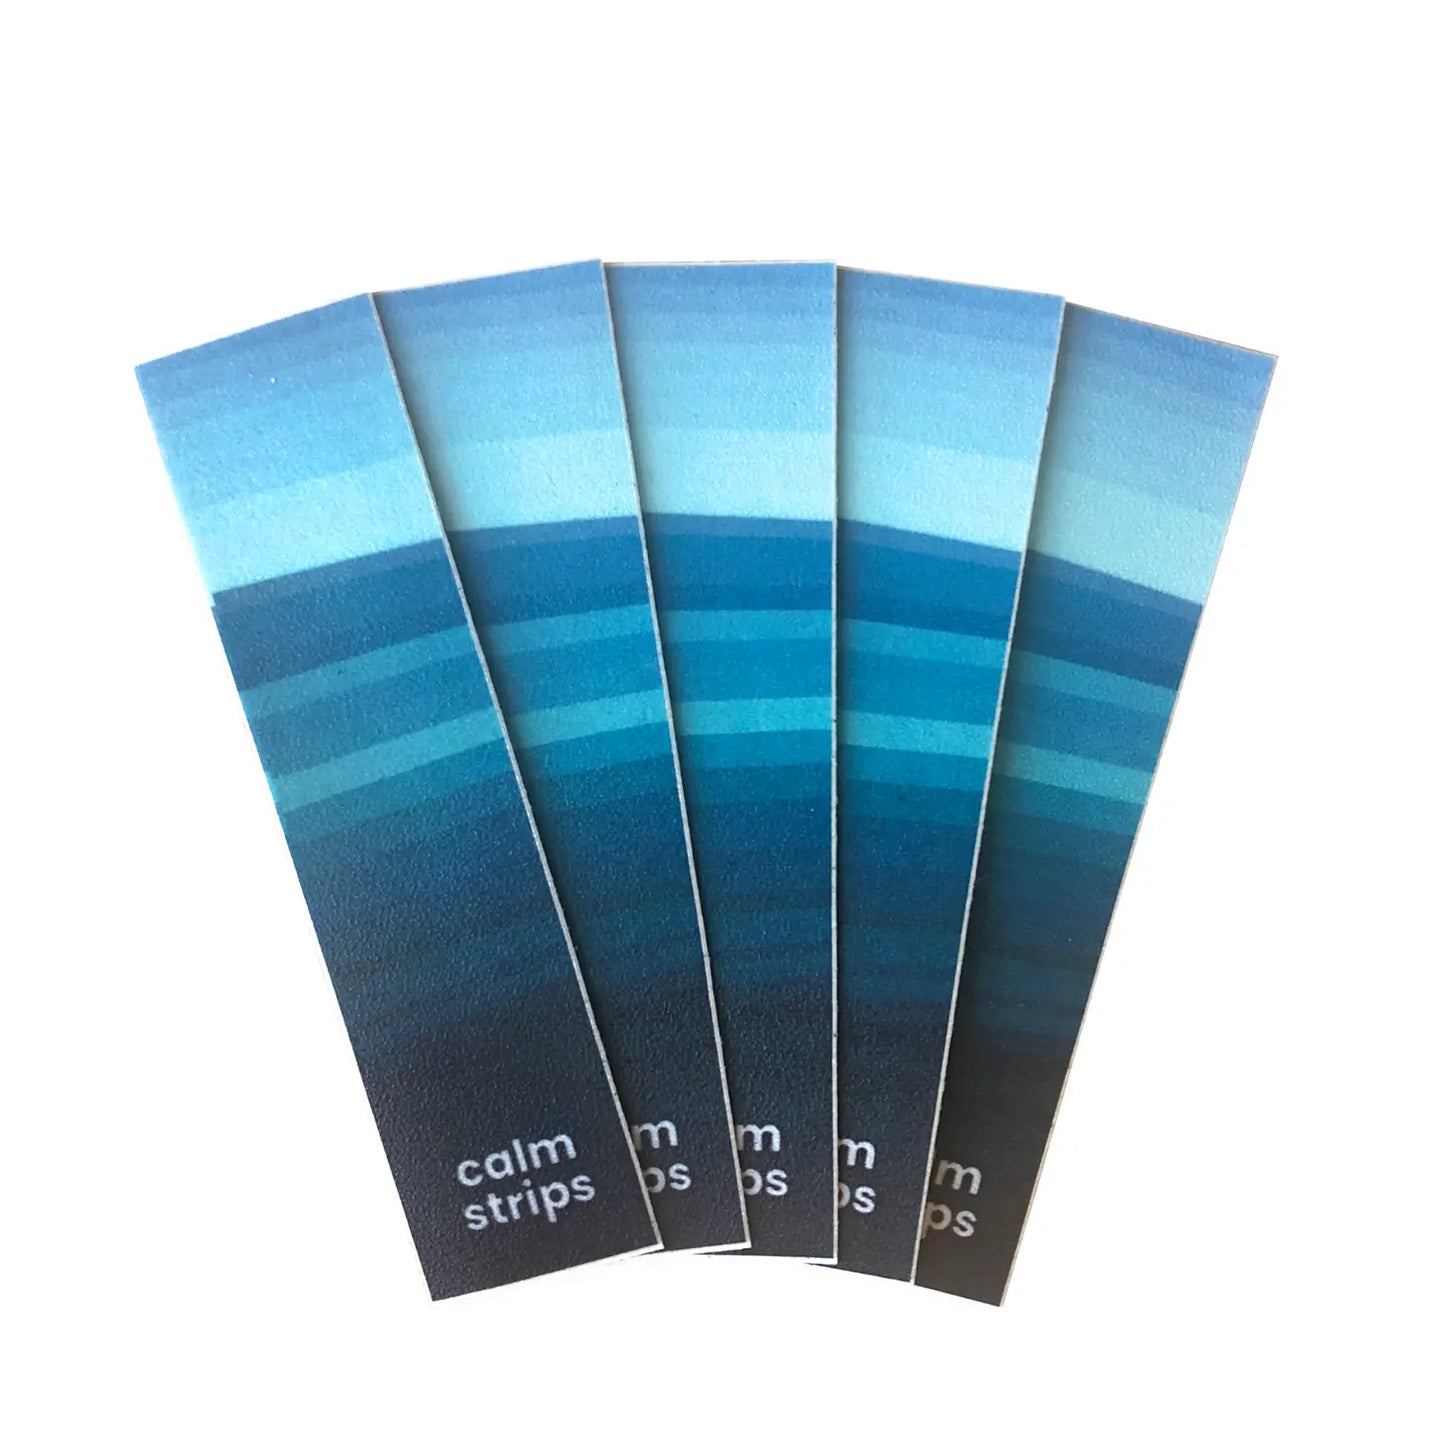 Morning Sea Calm Strips - 5 pack